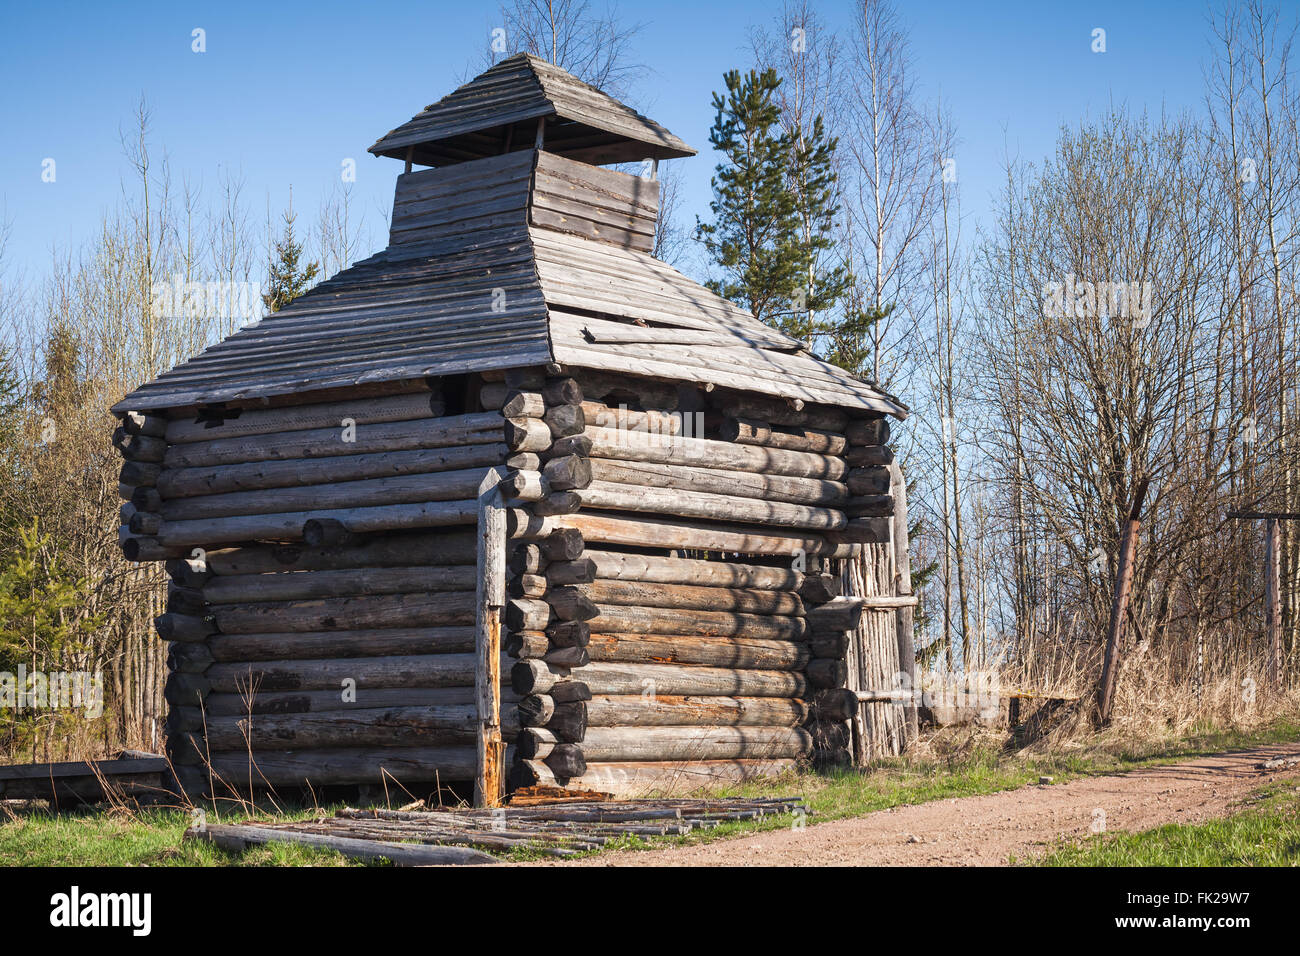 Old abandoned wooden barn, Russian village landscape in spring Stock Photo